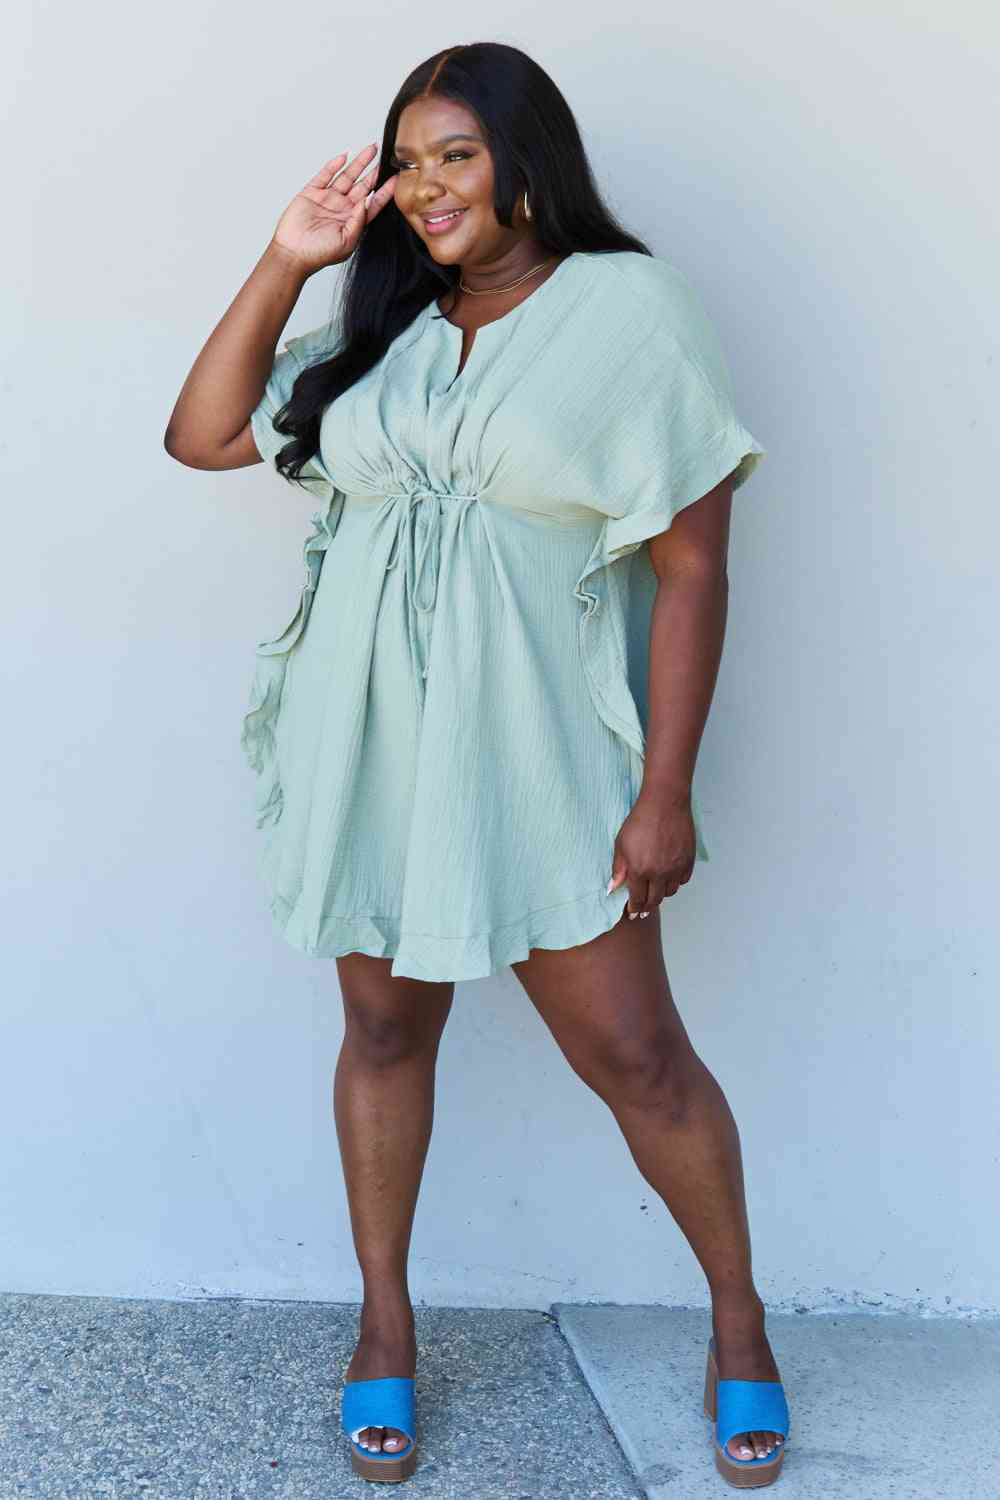 Ninexis Out Of Time Full Size Ruffle Hem Dress with Drawstring Waistband in Light Sage No 4